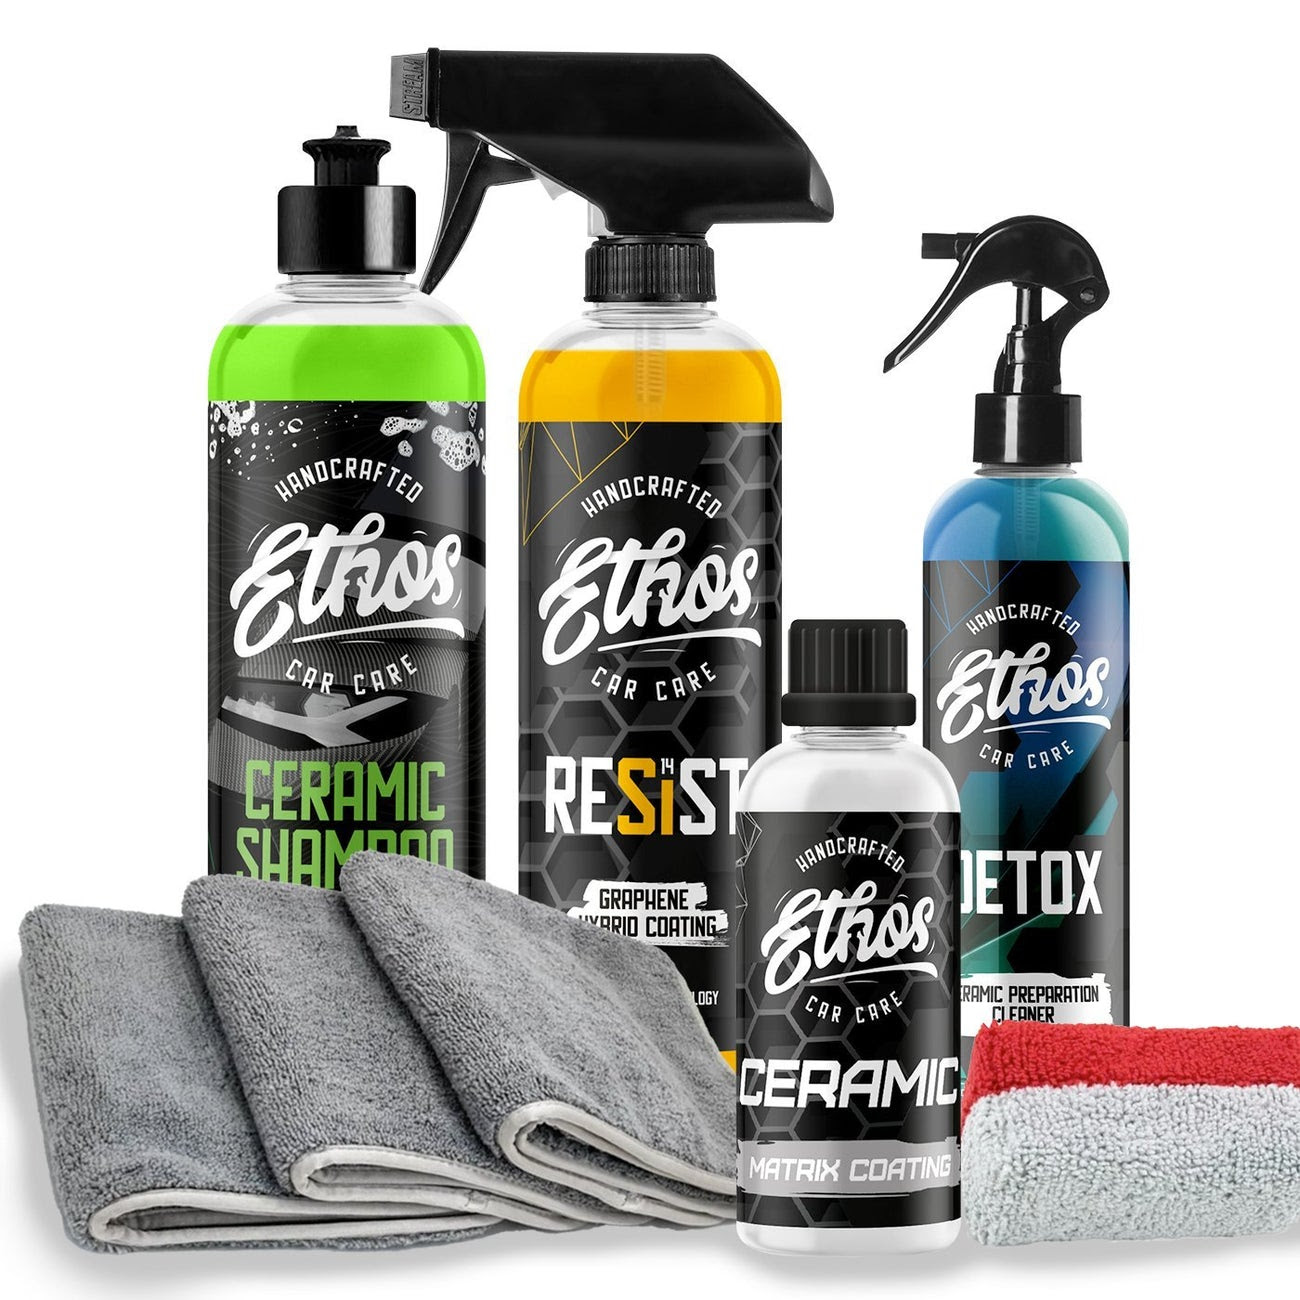 Ethos Car Care Partners with Ty Dillon and Petty GMS